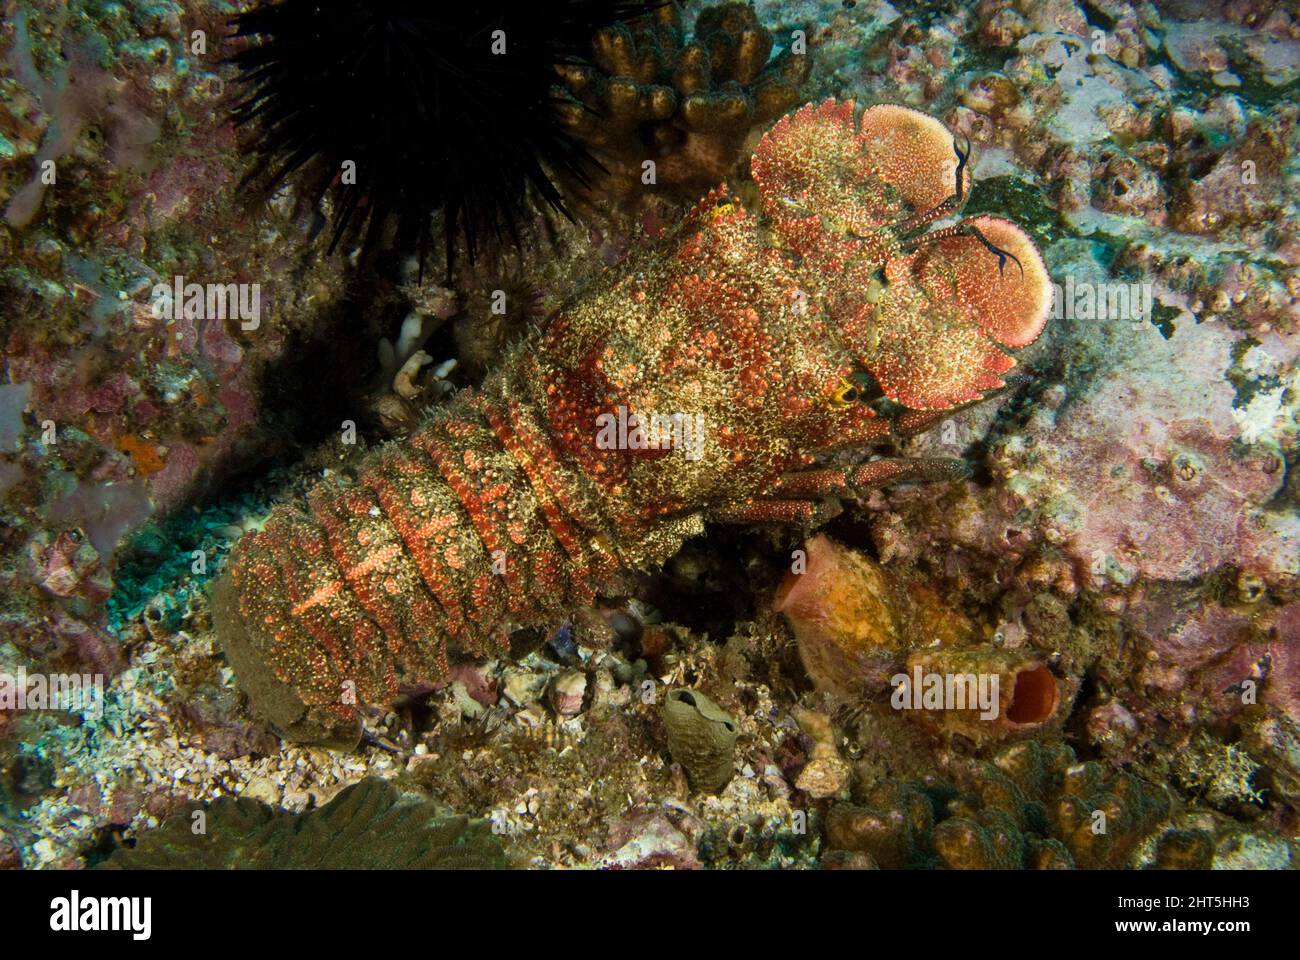 Slipper lobster. Arctides antipodarum.This species hides during the day and comes out at night to hunt.Solitary Islands Marine Park, New South Wales Stock Photo